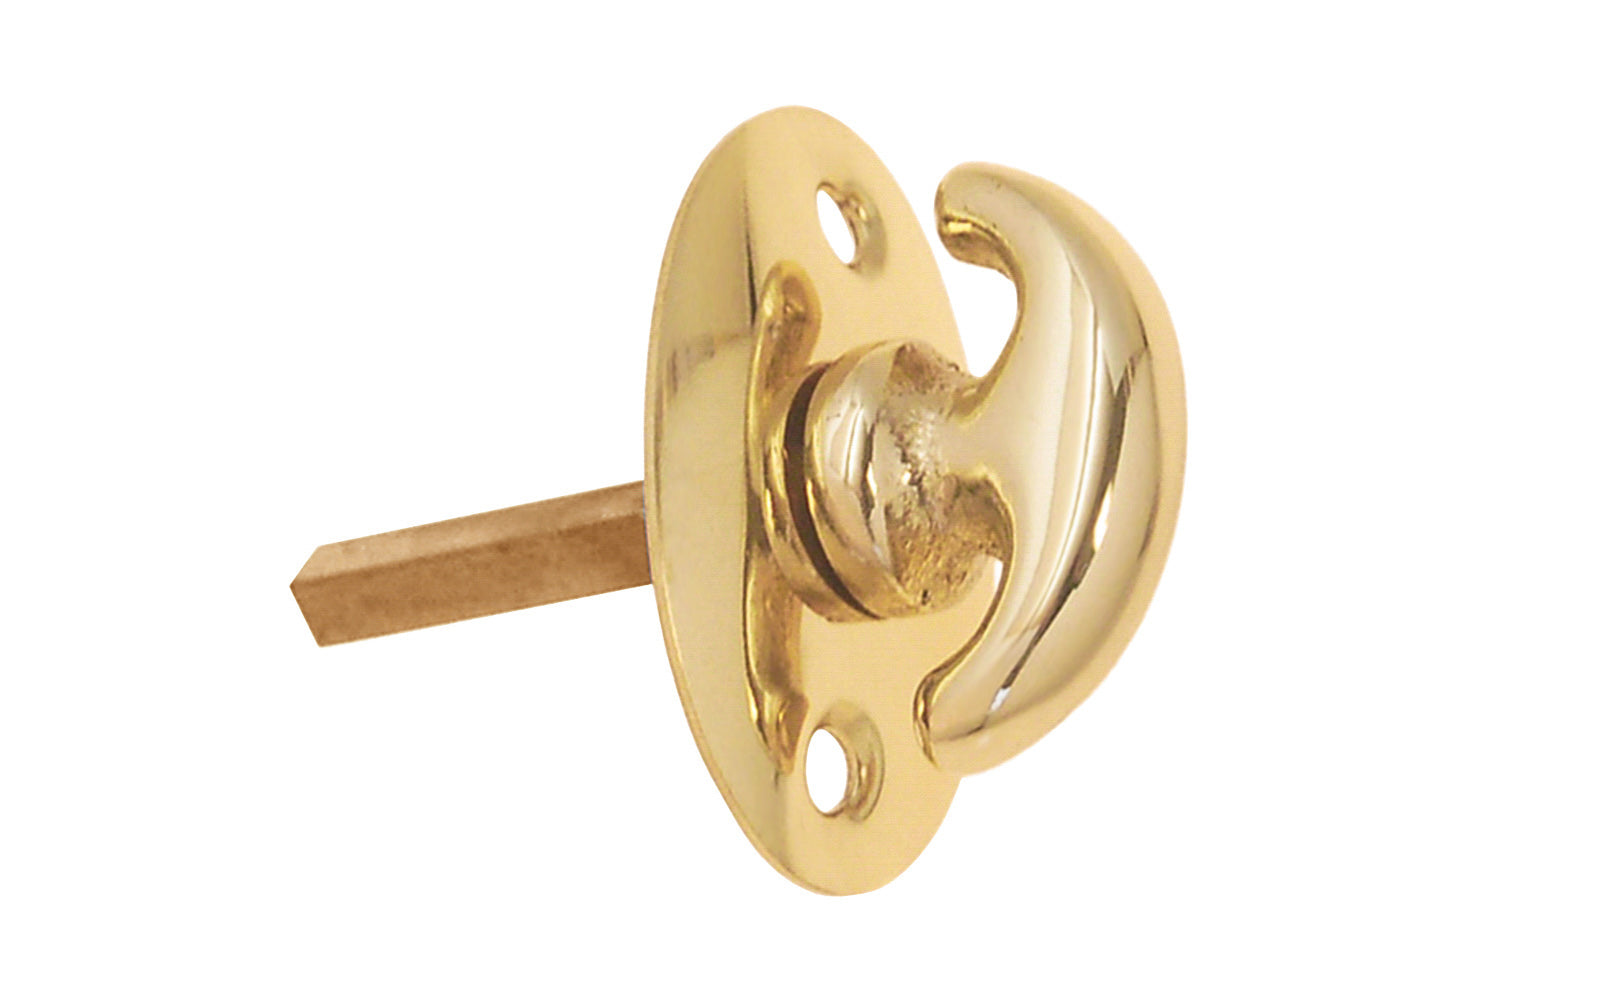 An old-style Classic Solid Brass crescent thumbturn for locking doors. Used with mortise locks, deadbolts, night-locks, catches. Made of solid brass material. 3/16" thick shaft. Unlacquered brass (will patina naturally)